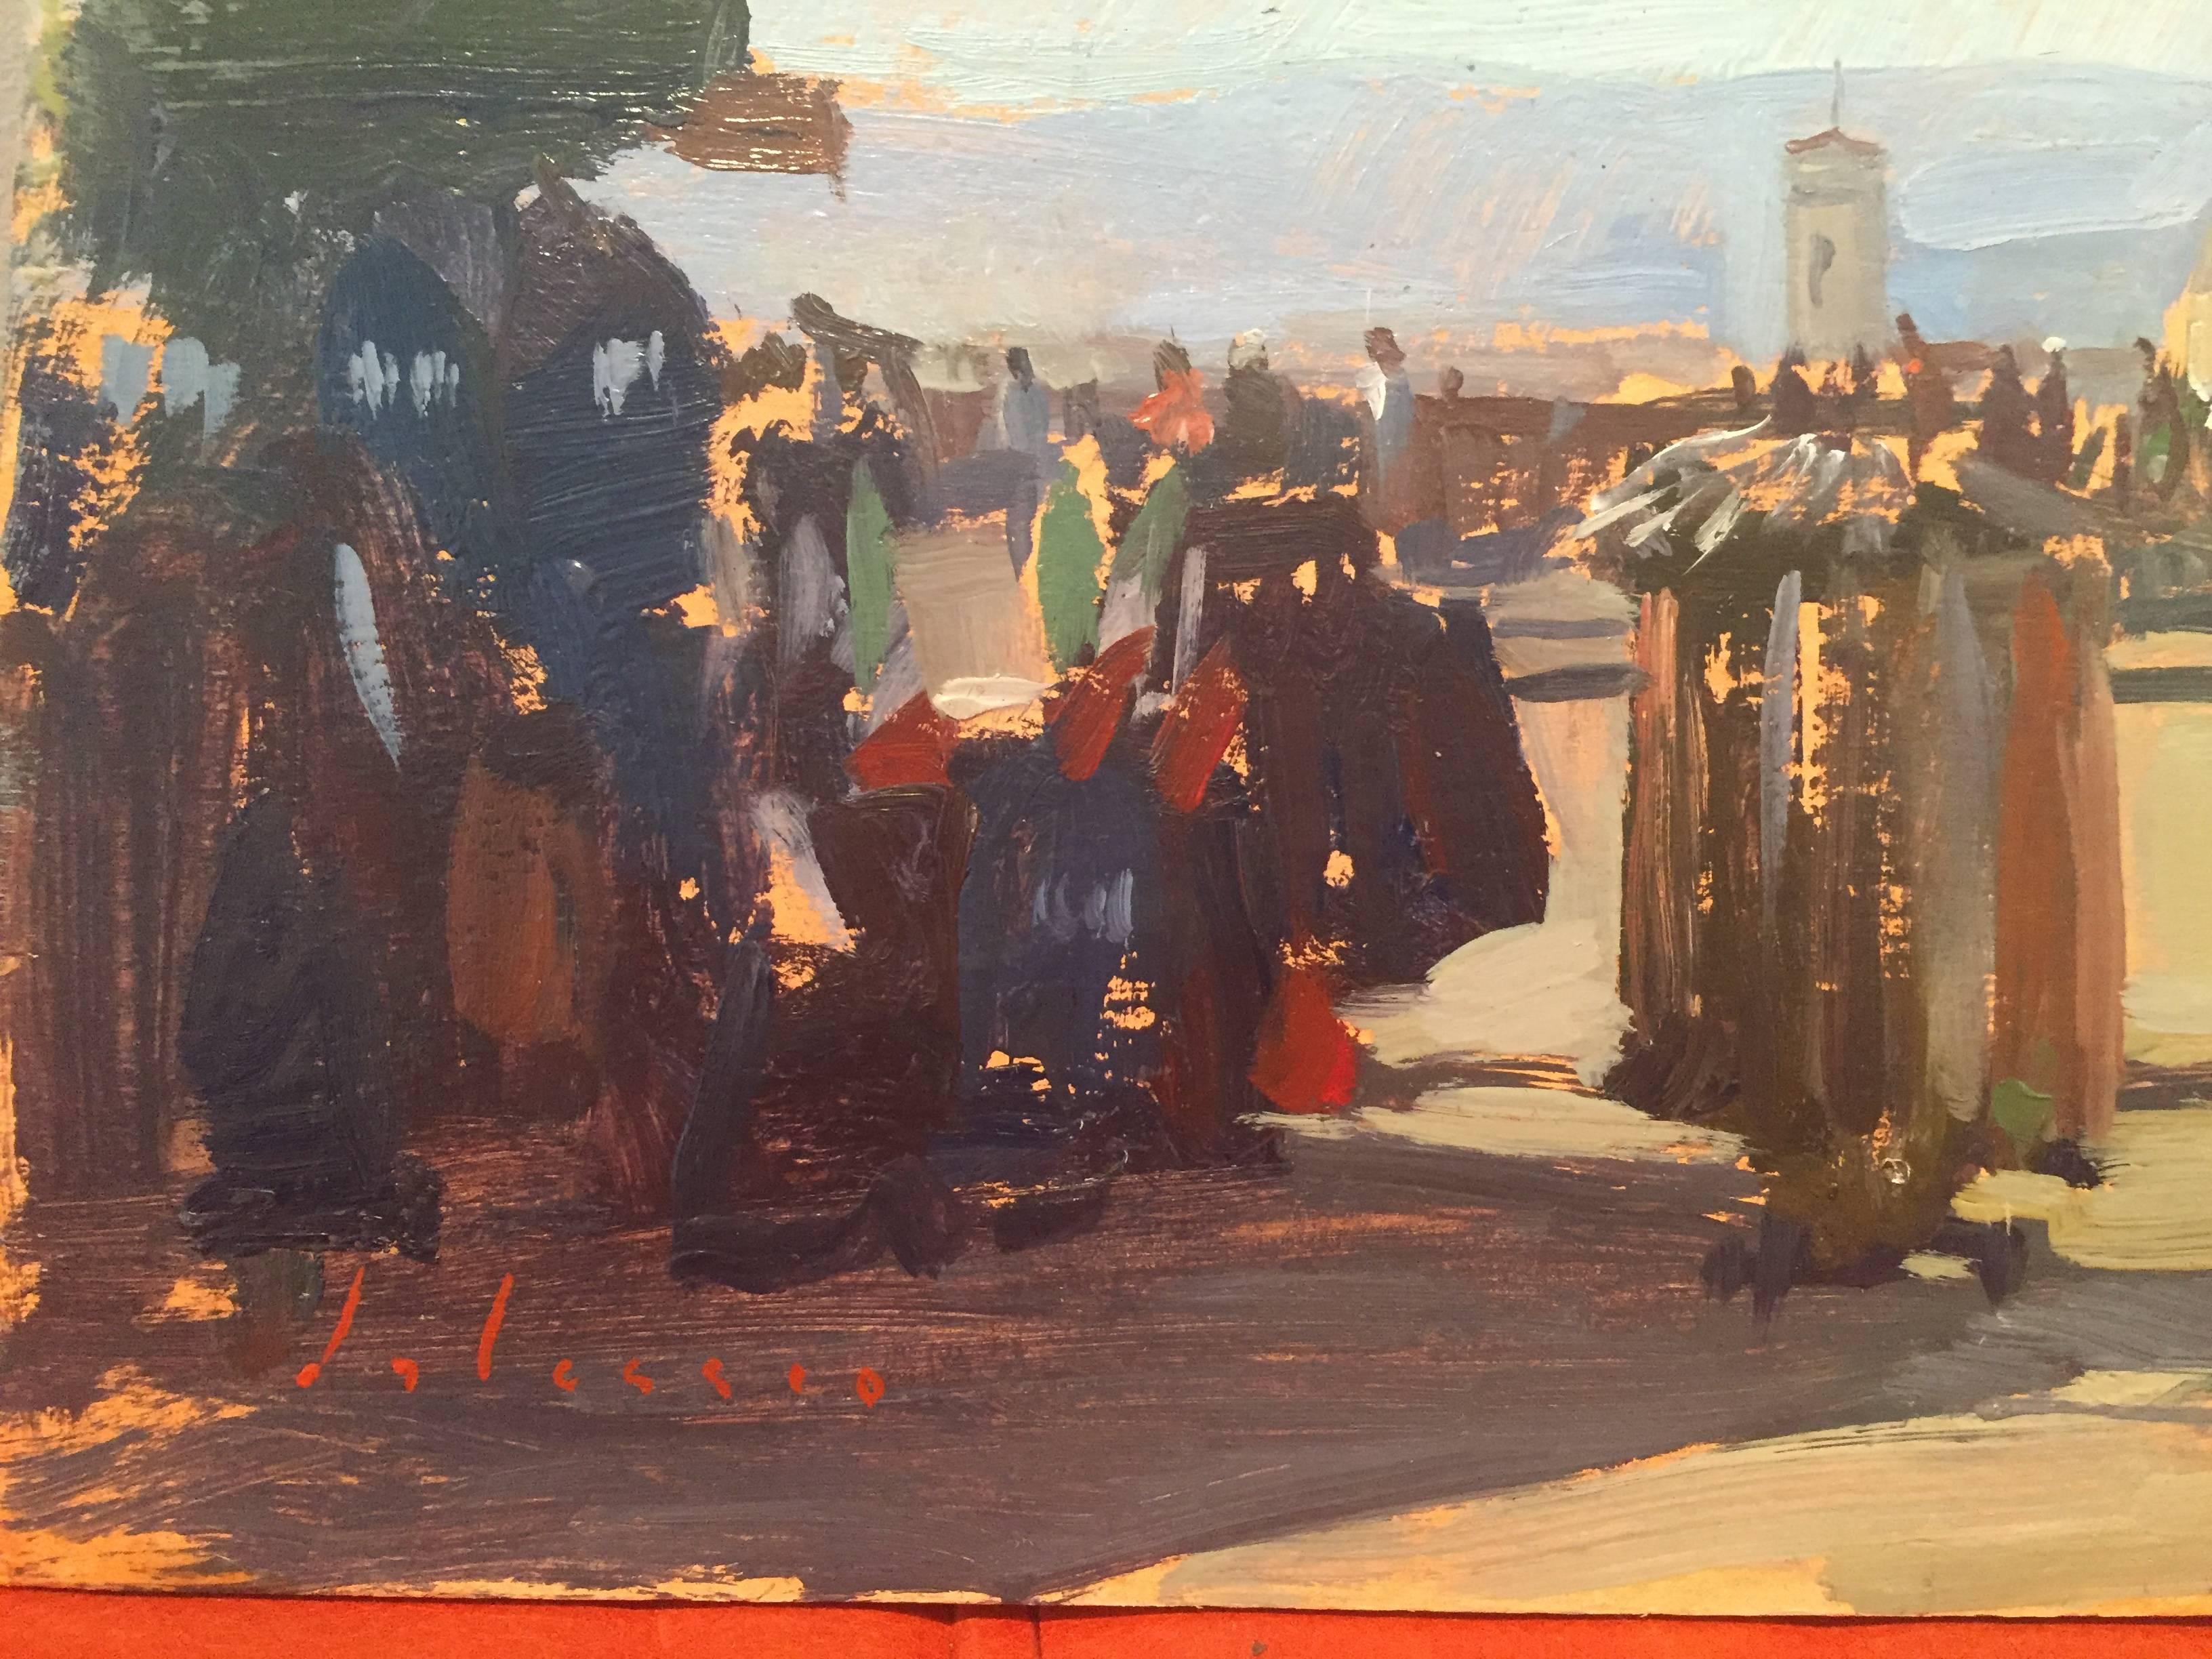 Painted en plein air at Piazzale Michelangelo, a square with a panoramic view of Florence, Italy, located in the Oltrarno district of the city. People stop at outdoor booths like a sort of market. Italian flags fly throughout the square. You can